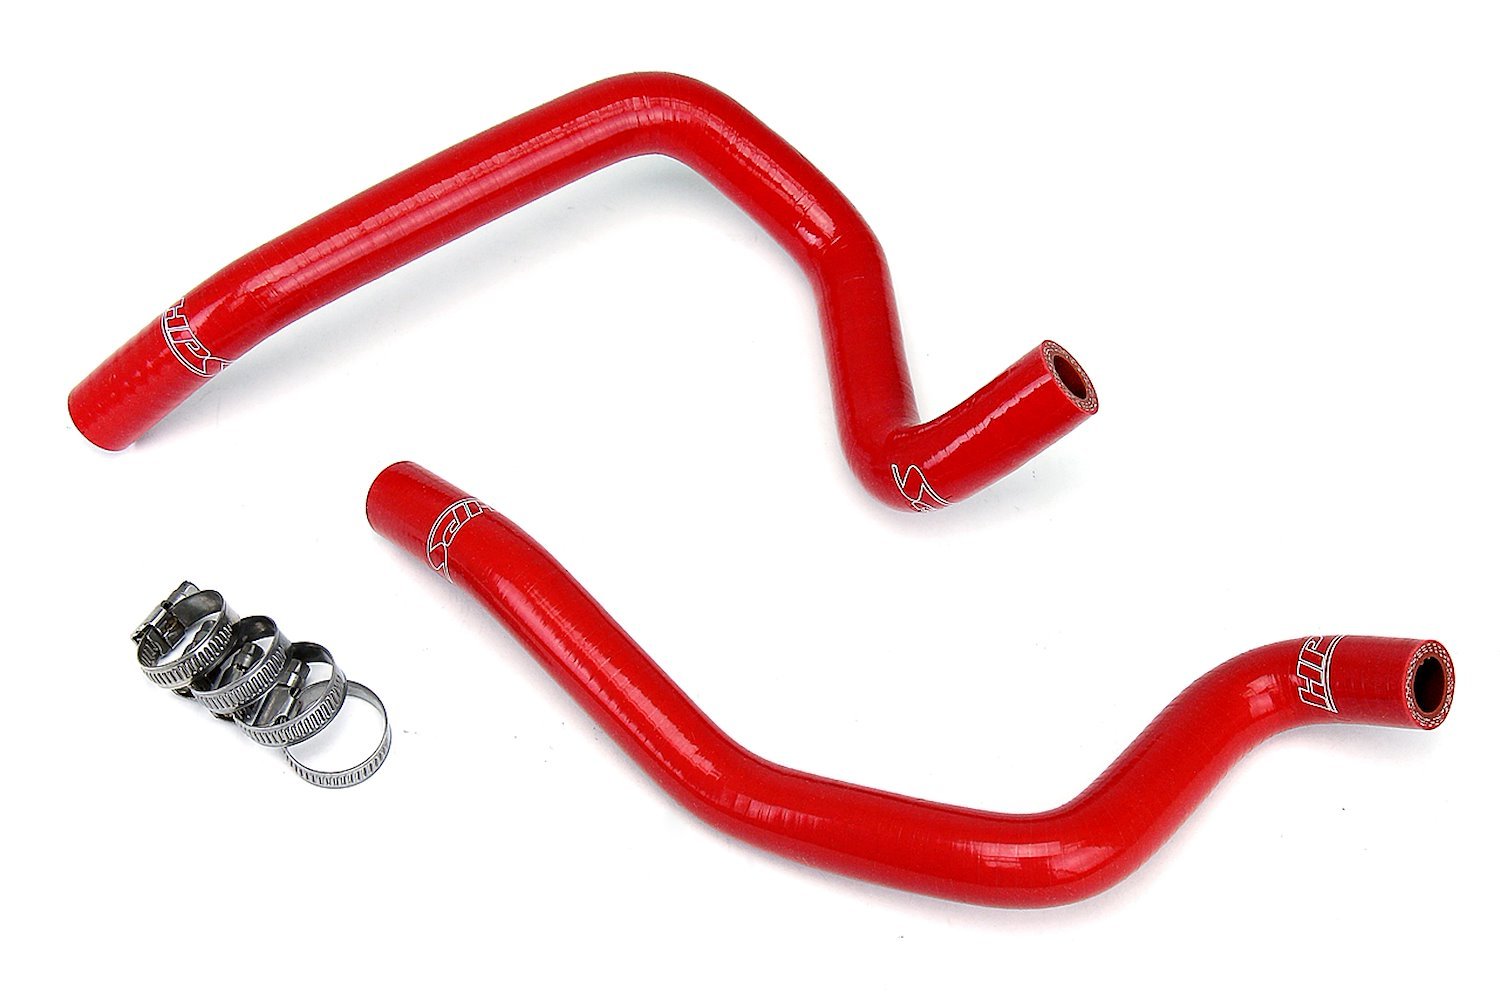 57-1803-RED Heater Hose Kit, 3-Ply Reinforced Silicone, Replace OEM Rubber Heater Coolant Hoses